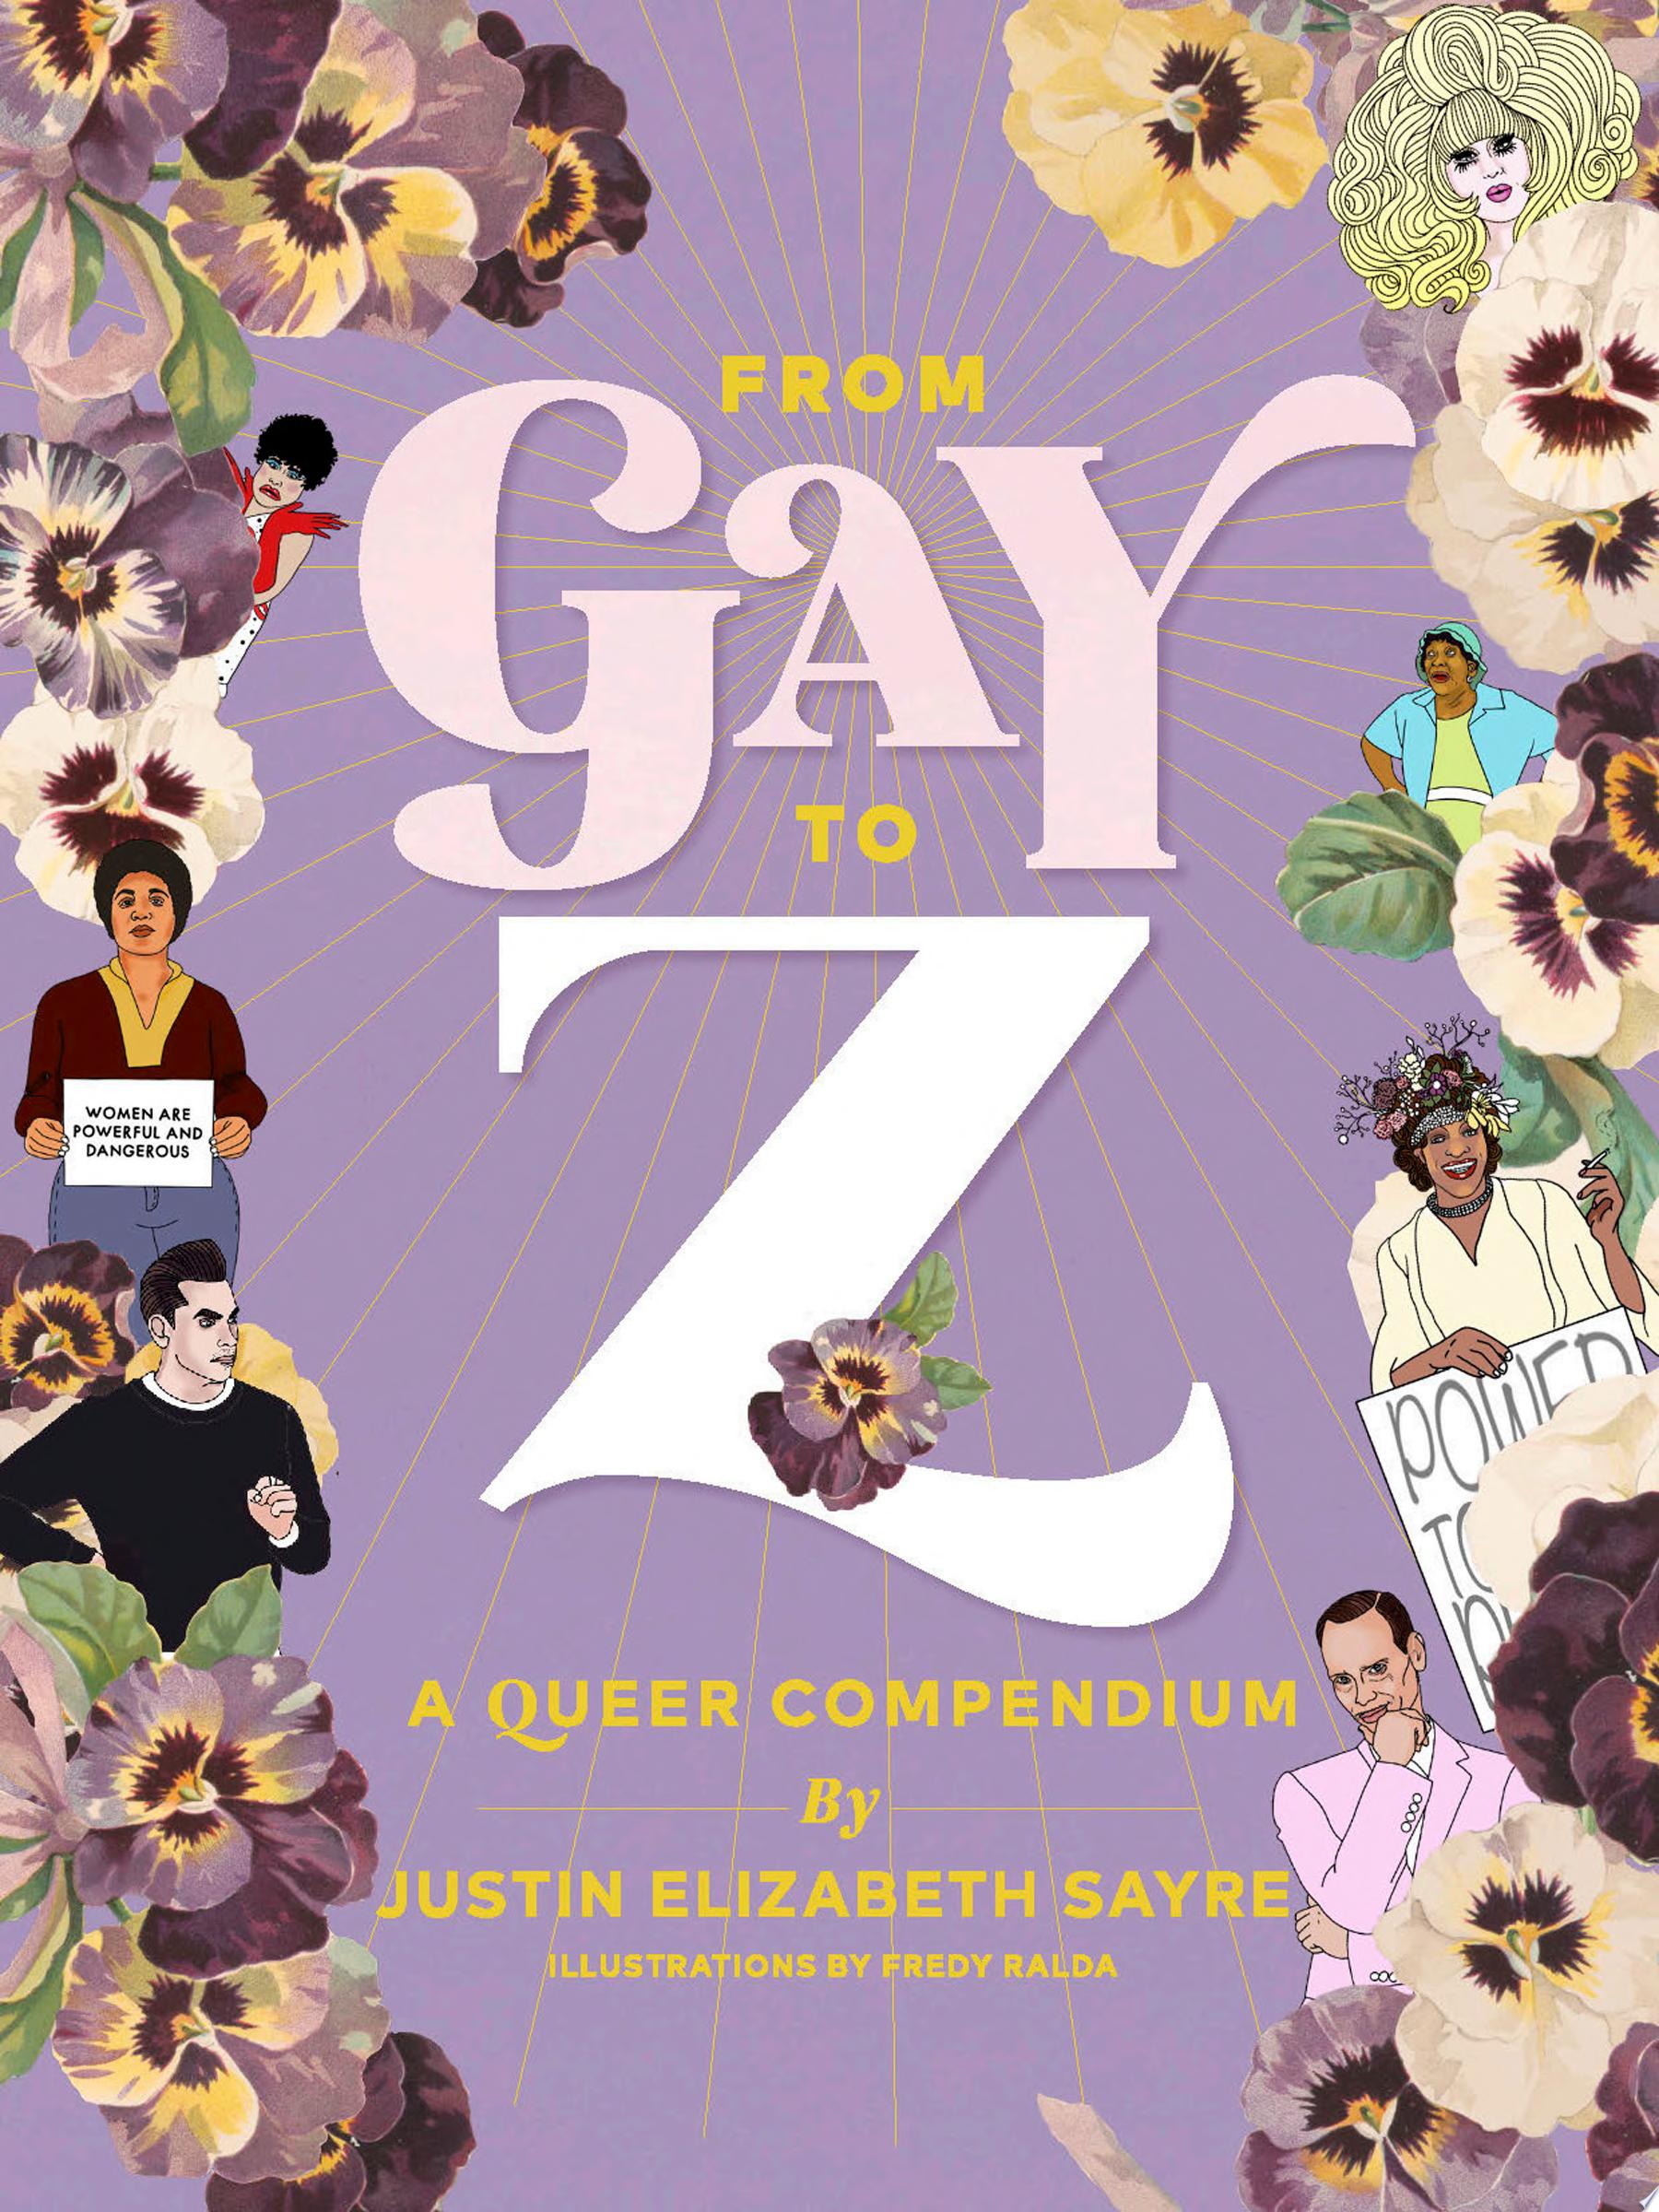 Image for "From Gay to Z: A Queer Compendium"